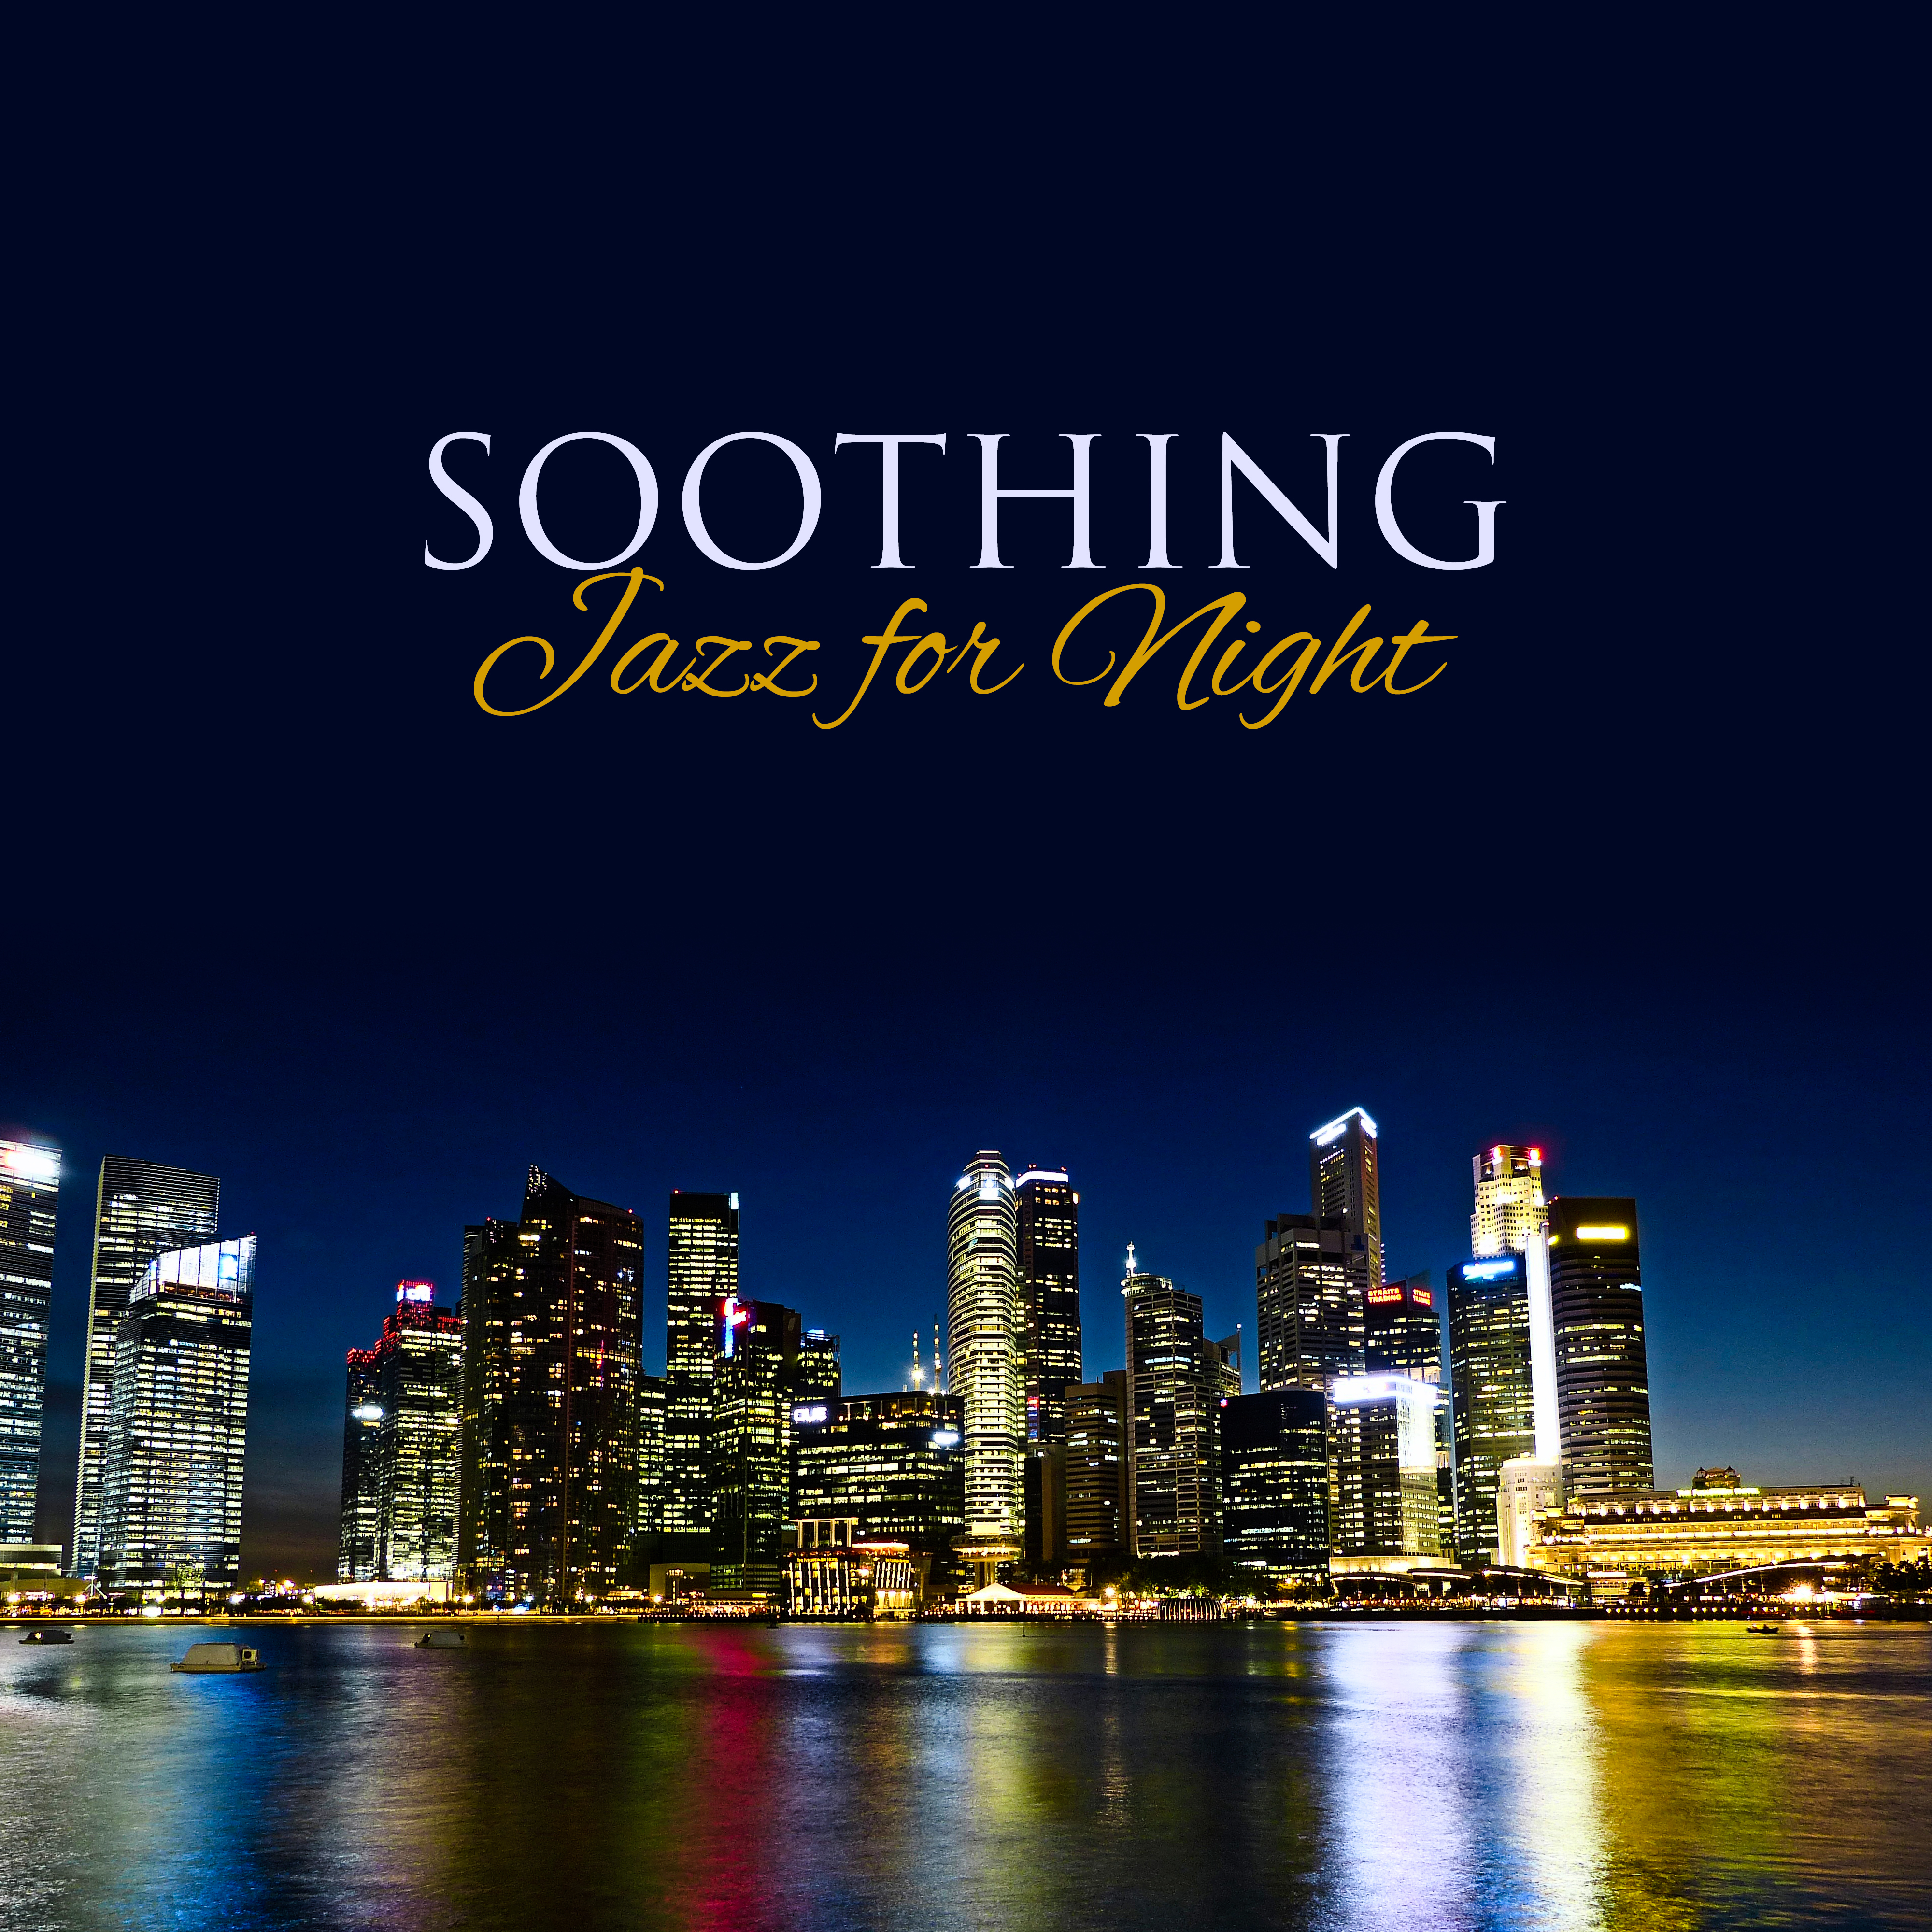 Soothing Jazz for Night – Sweet & Relaxing Jazz Music, Rest All Night, Best Background Jazz Melodies